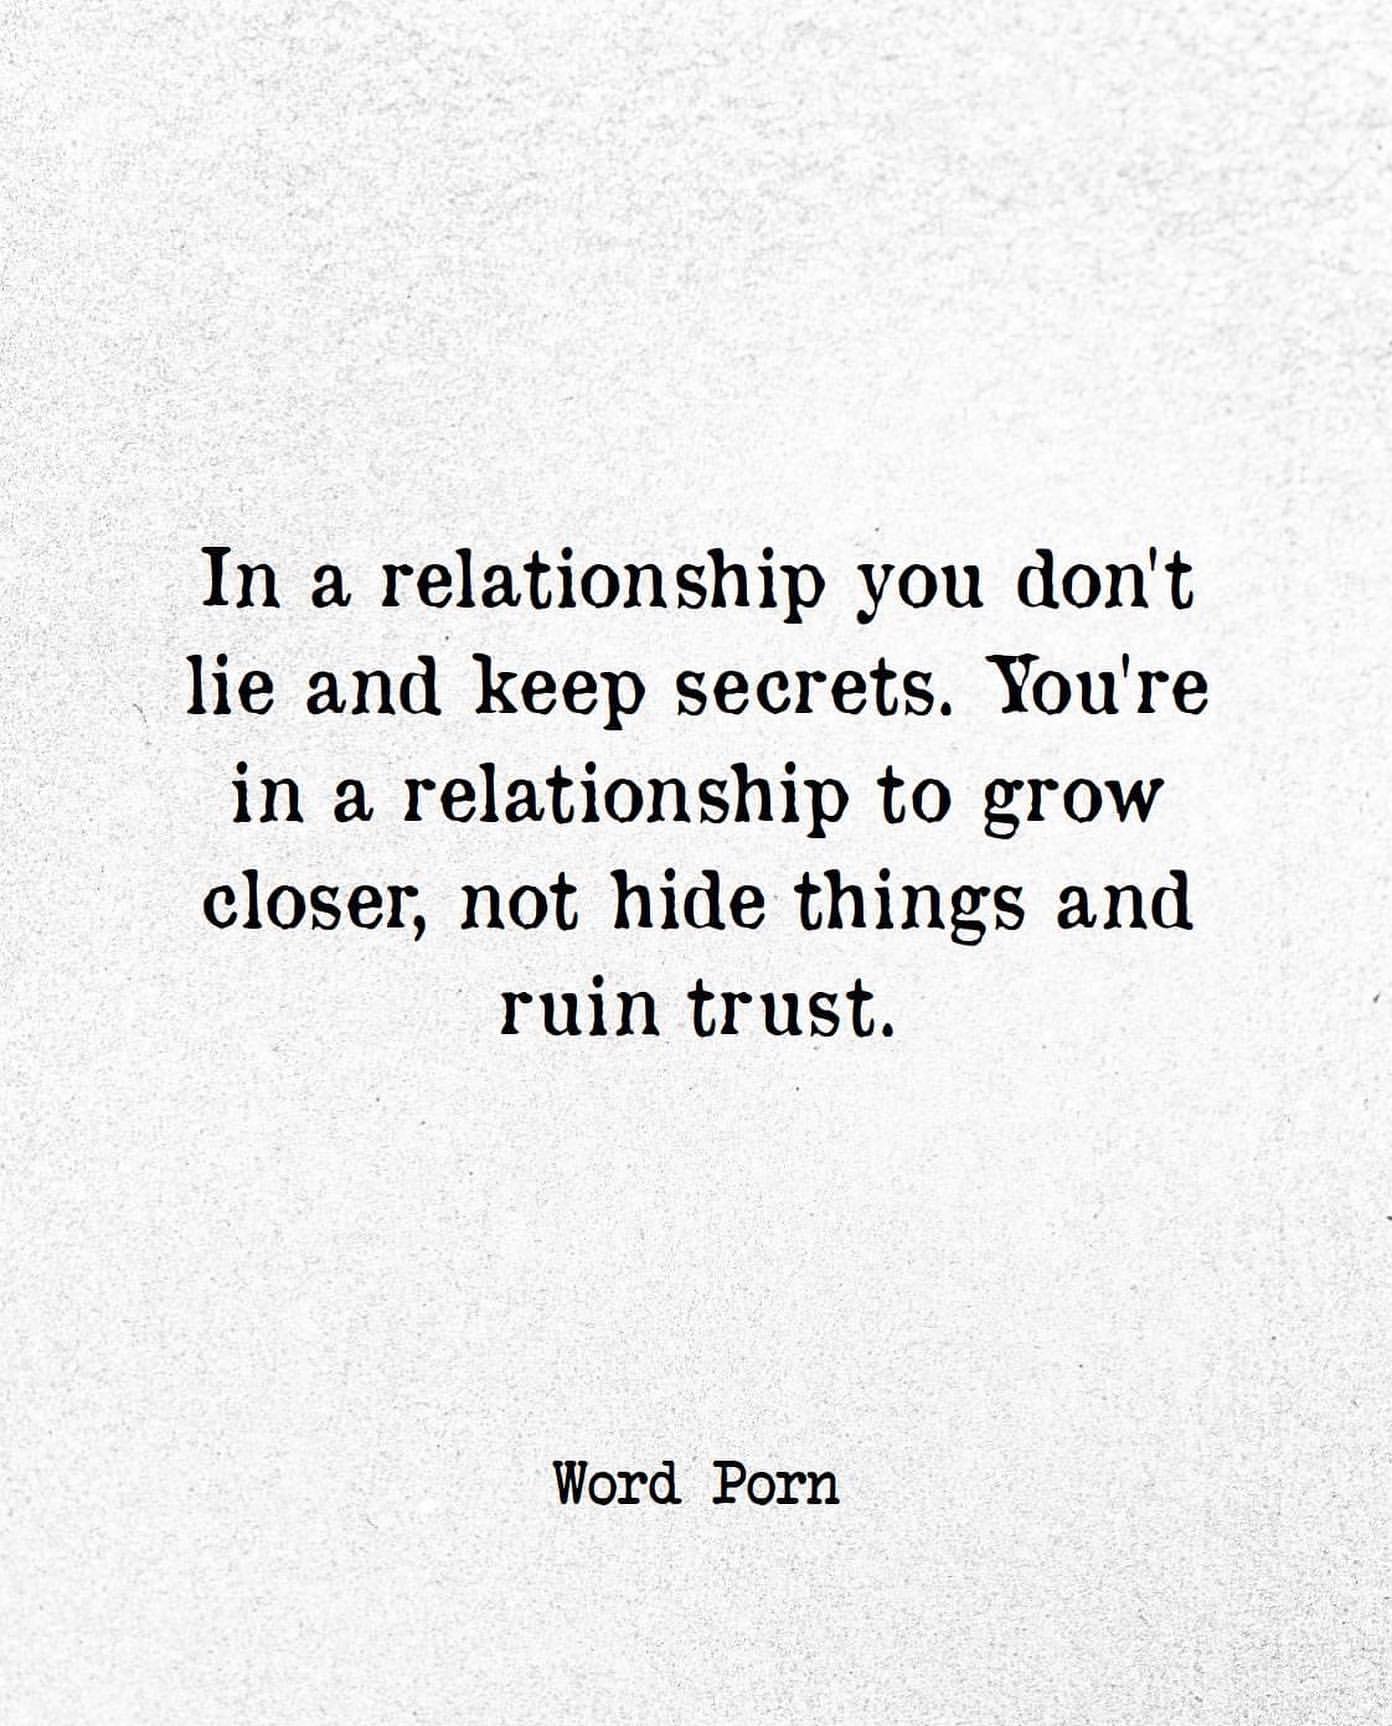 In a relationship you don't lie and keep secrets. You're in a relationship to grow closer, not hide things and ruin trust.